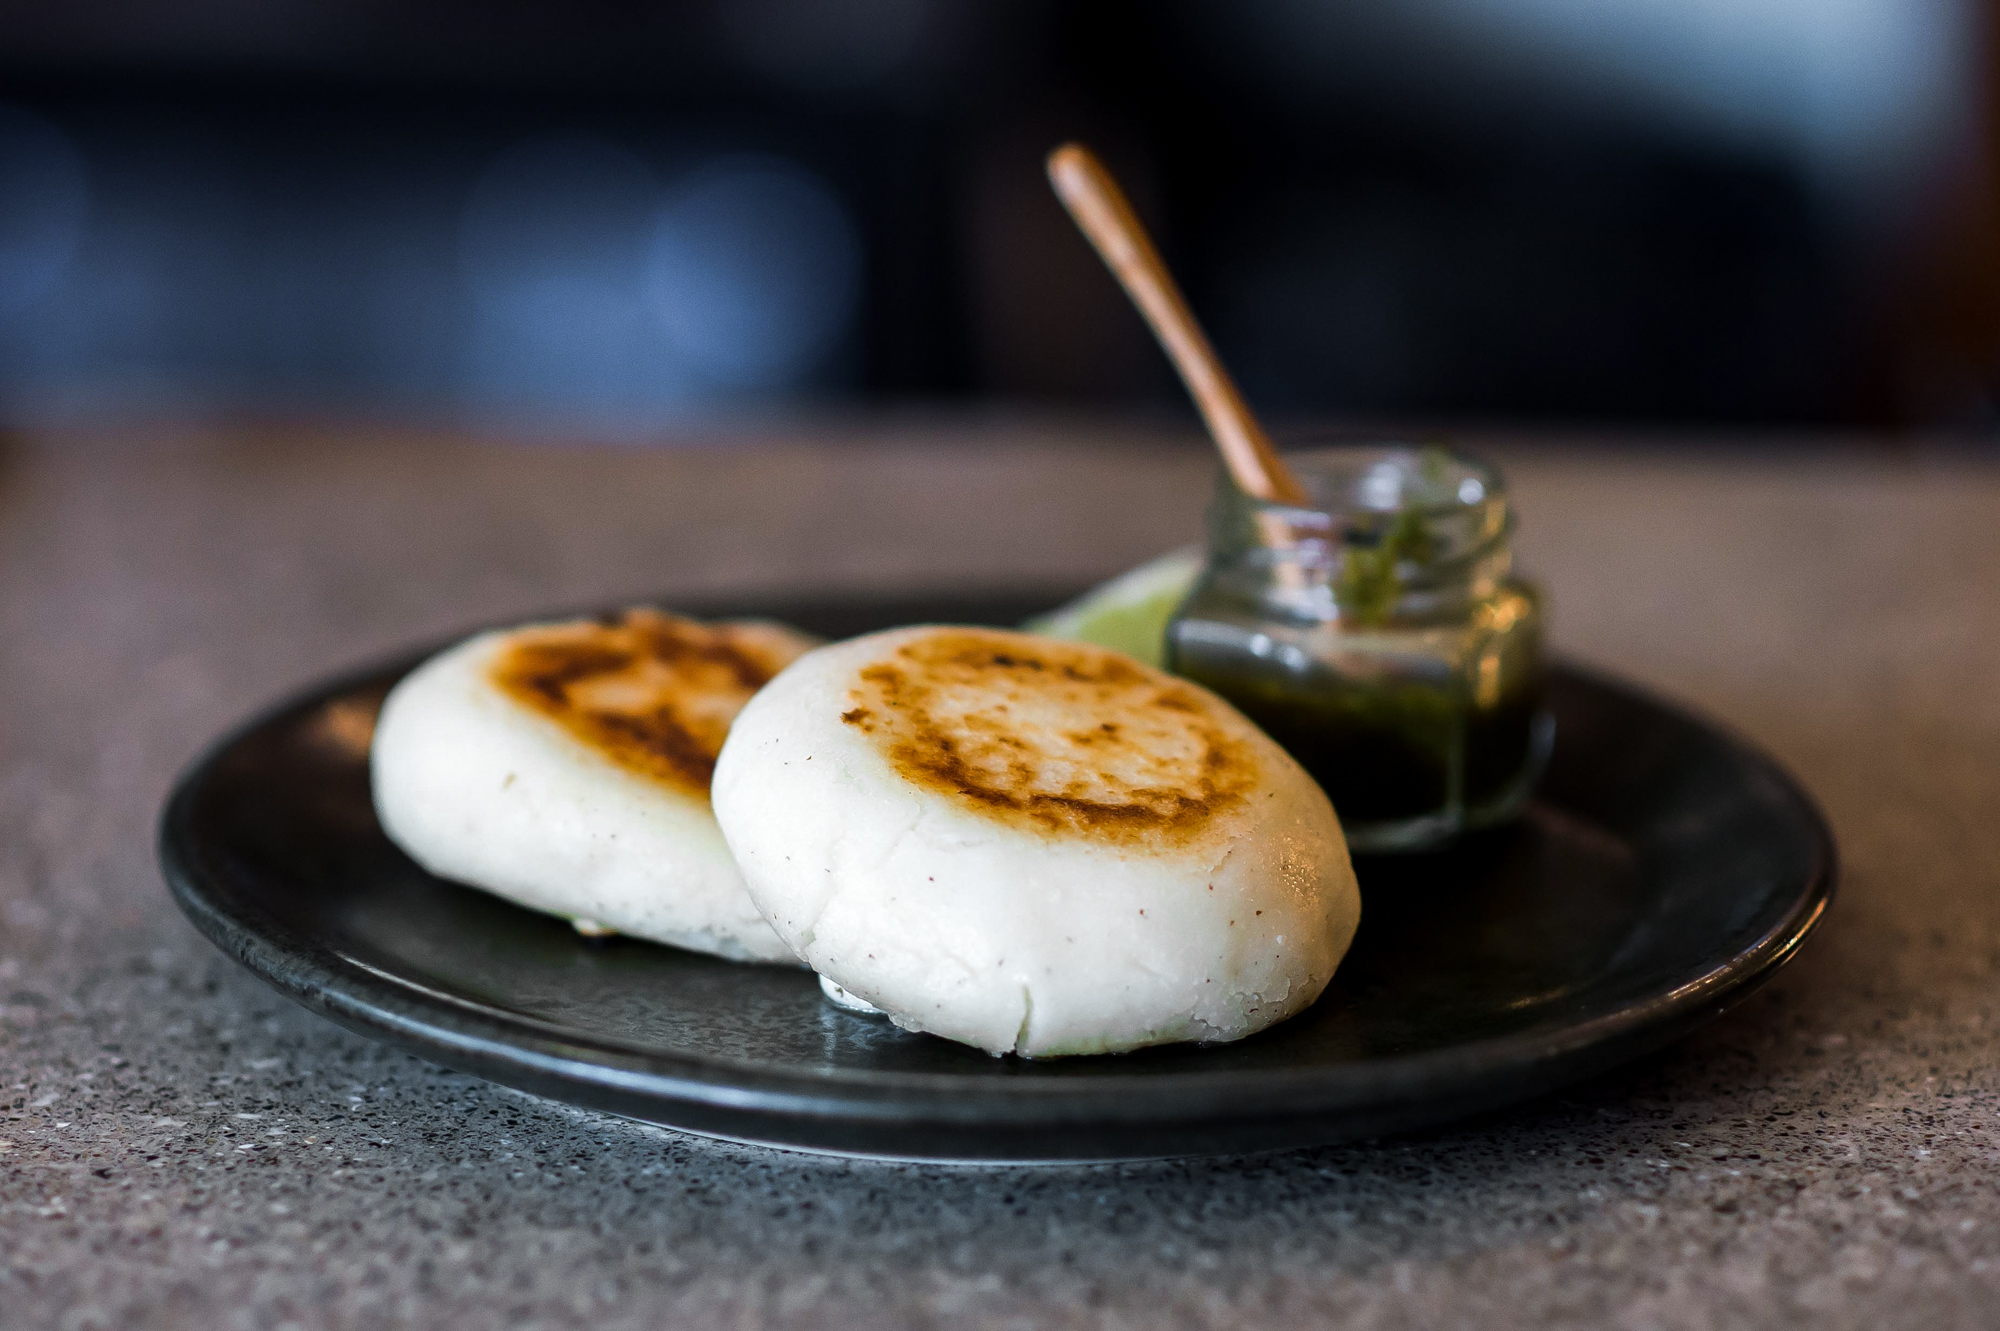 The Royal restaurant serves cheese arepas in Washington, D.C. As Venezuelans flee their troubled country, they bring with them a taste for the popular cornmeal cakes.